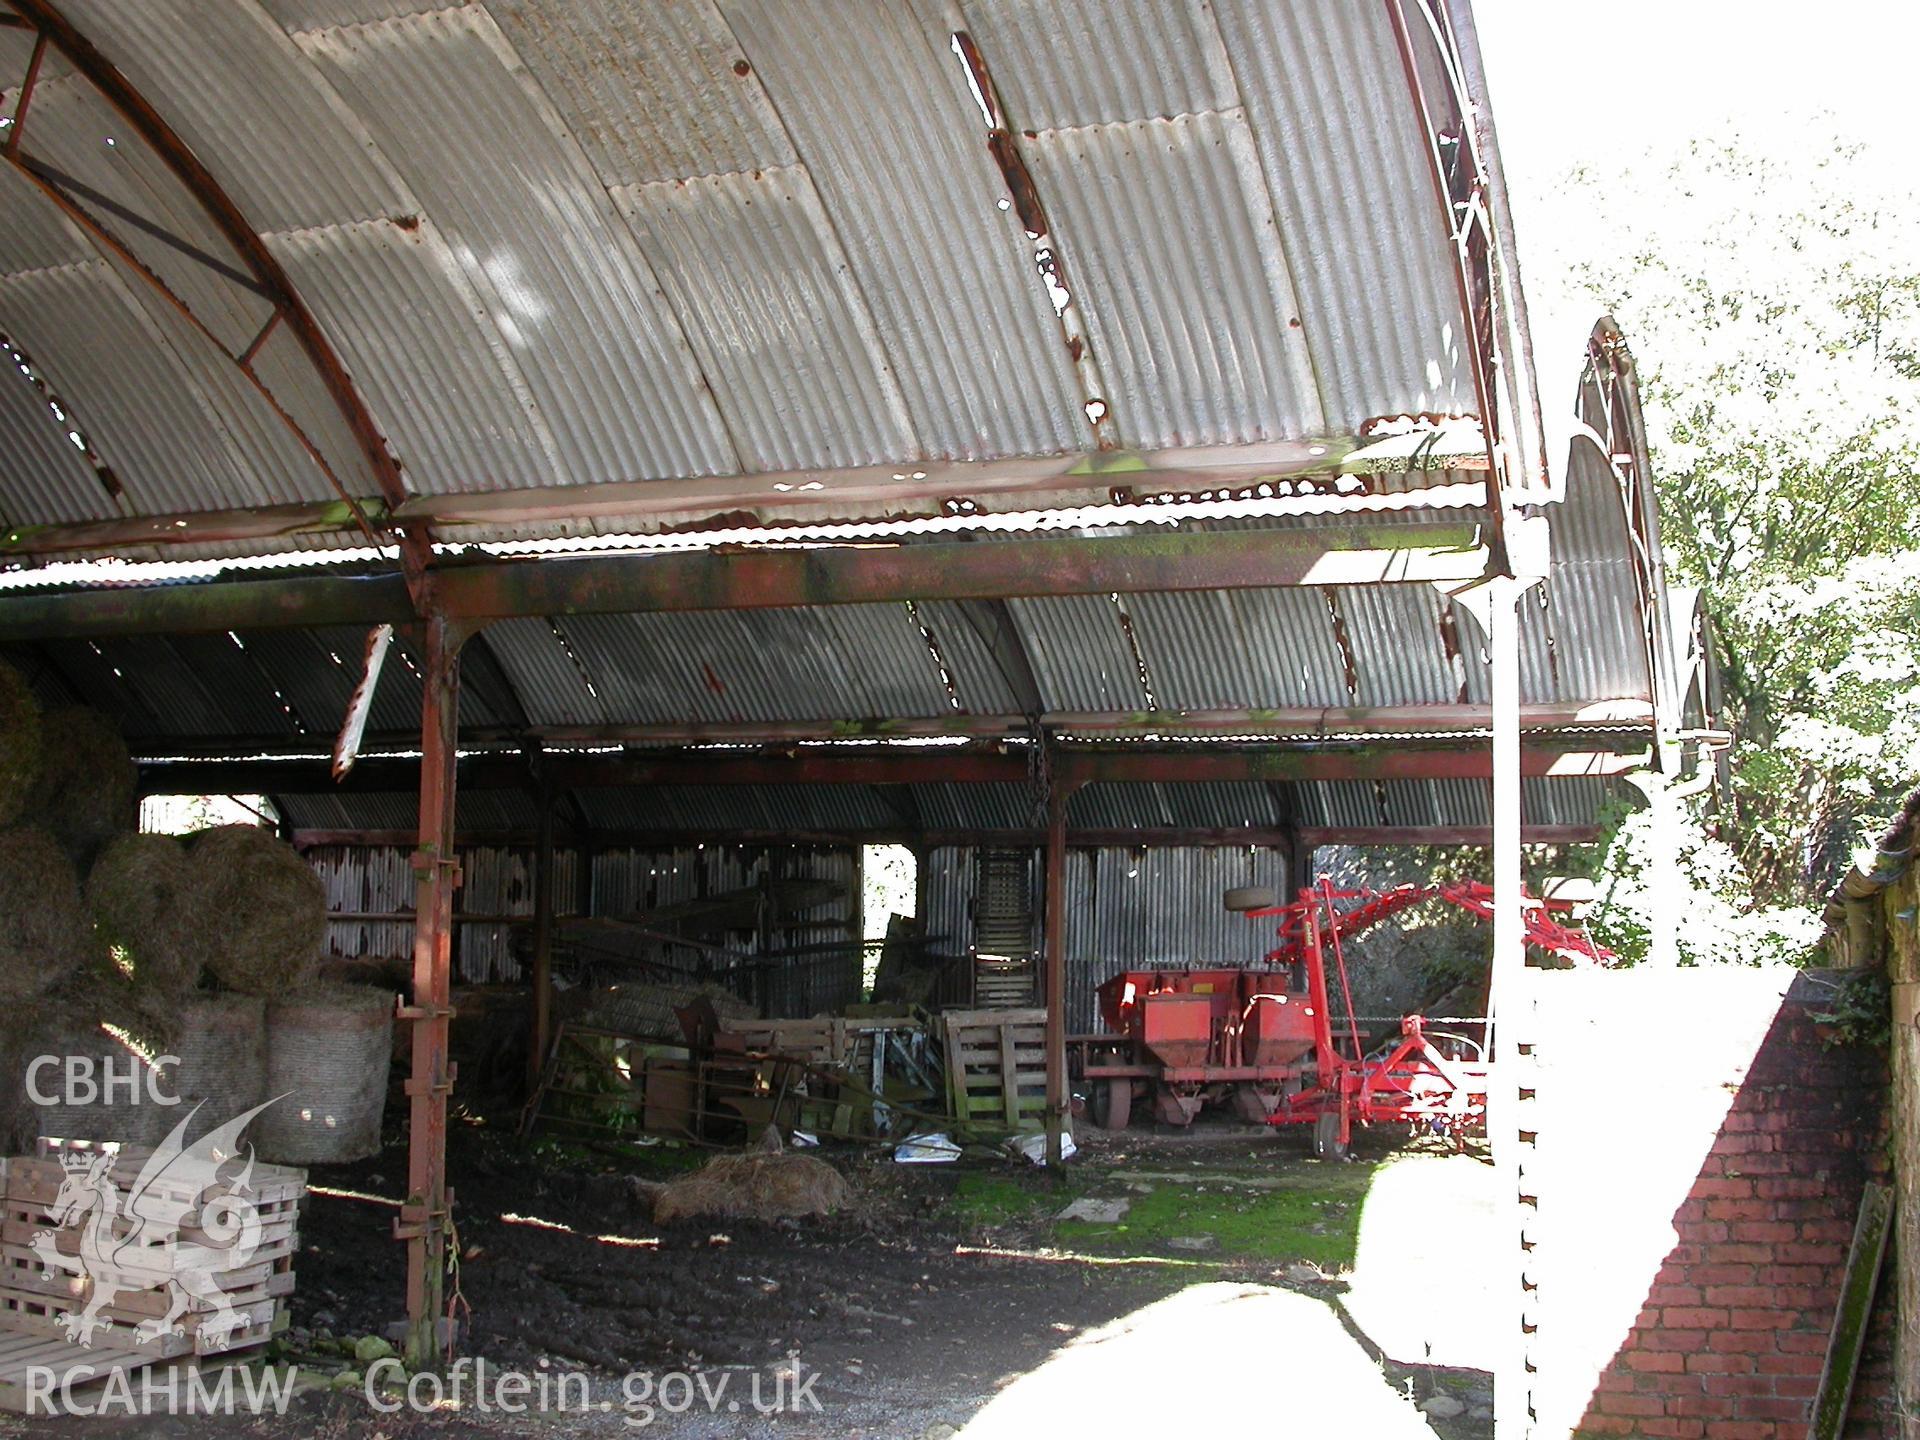 Interior of Dutch barns, from S-E.